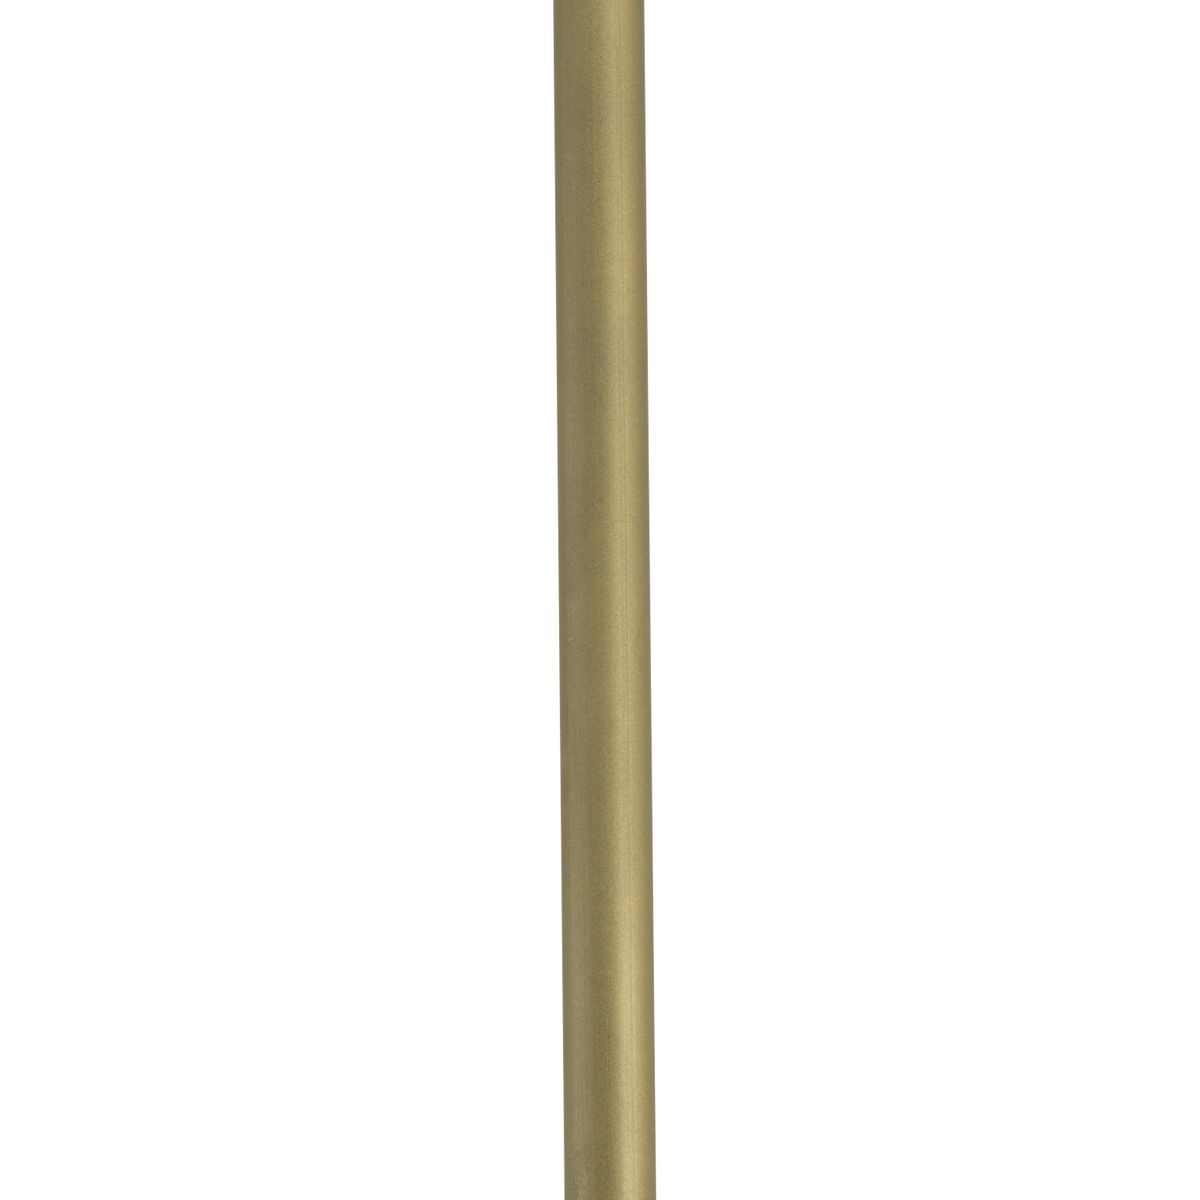 This stem extension kit is for use with fixtures requiring additional overall length for installation on higher ceilings. At least one link of chain will still be required at the top. Stems are finished to match Progress Lighting products. The kit includes (2) 12 in. and (2) 15 in. stems in Aged Brass and 1/8IP threaded connectors. Chain links are not included.